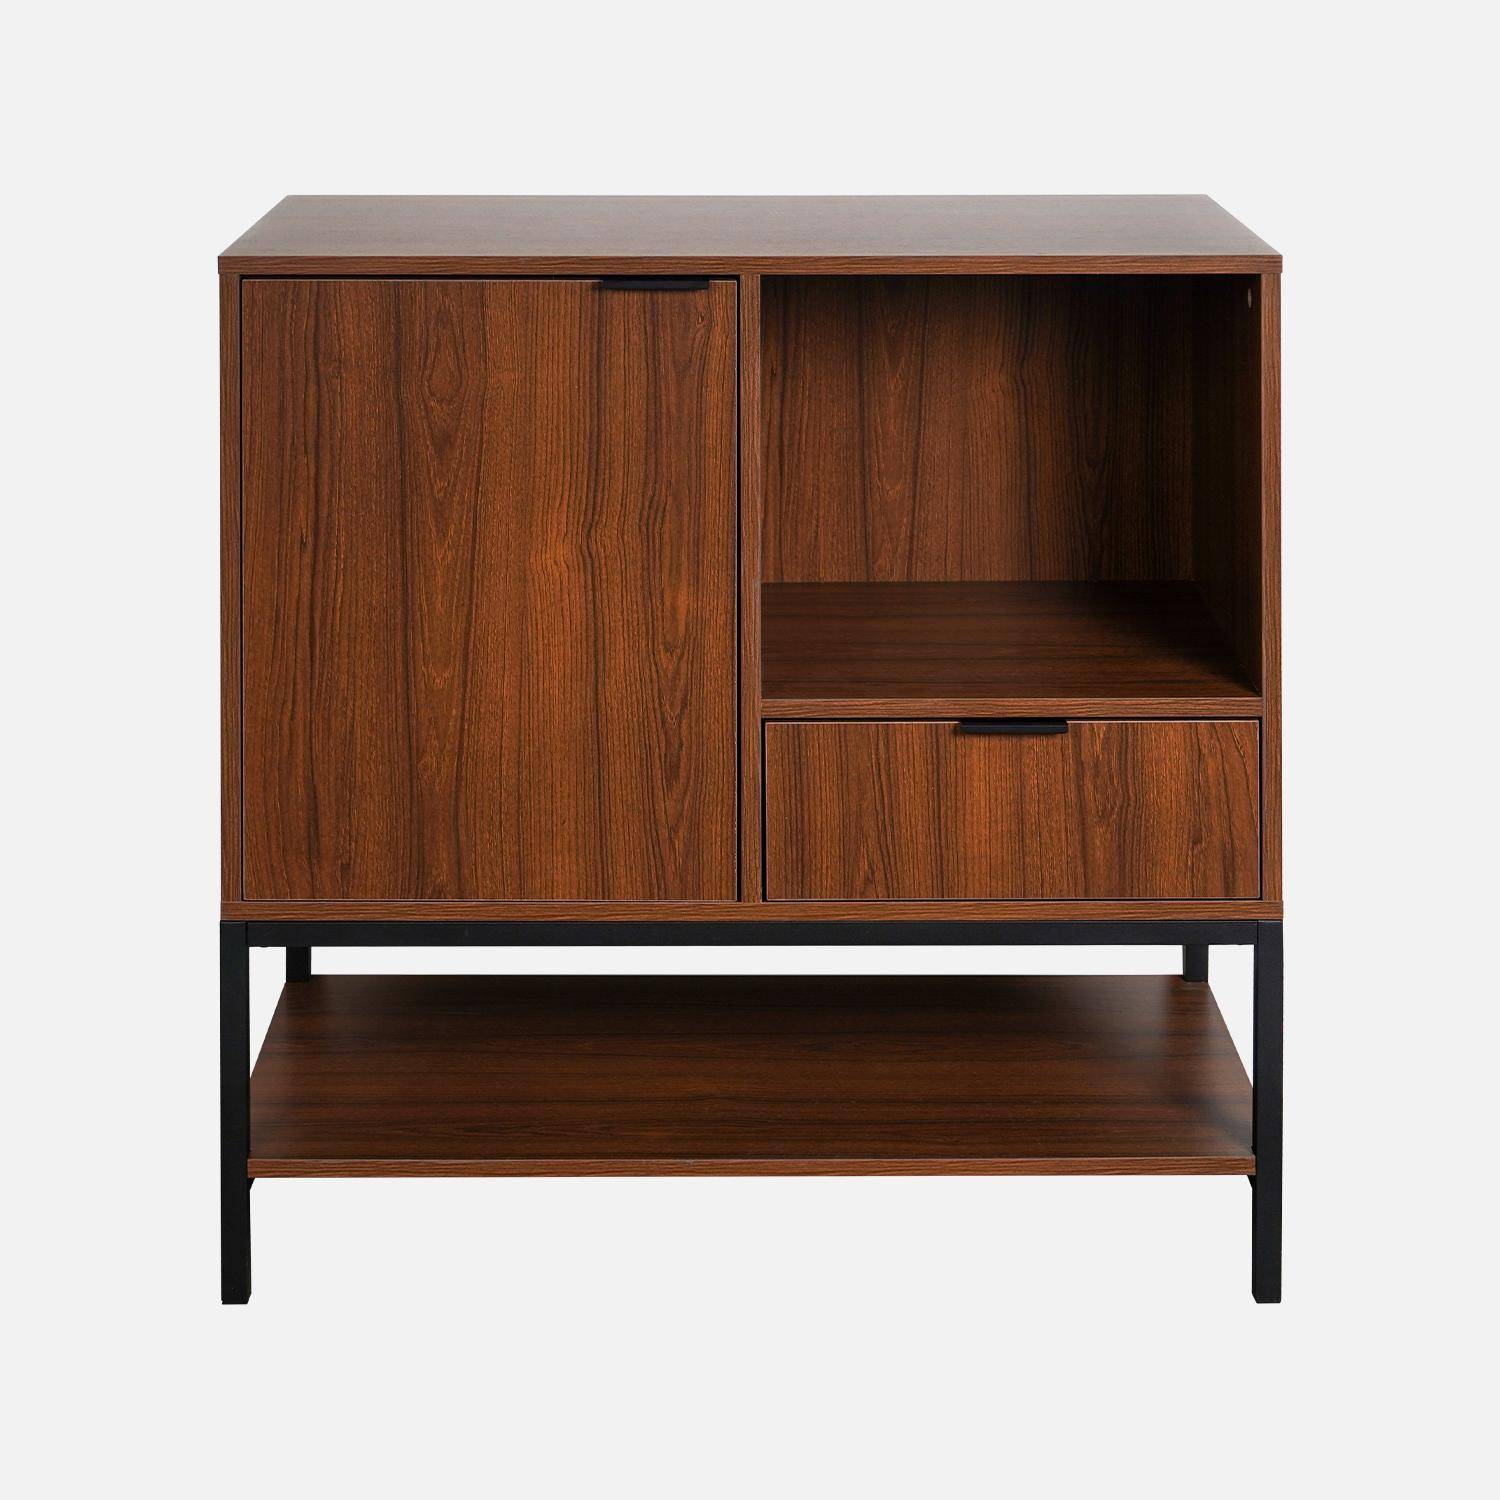 Low sideboard in walnut with black metal legs and handles - 1 door, 1 drawer and 2 shelves Photo4